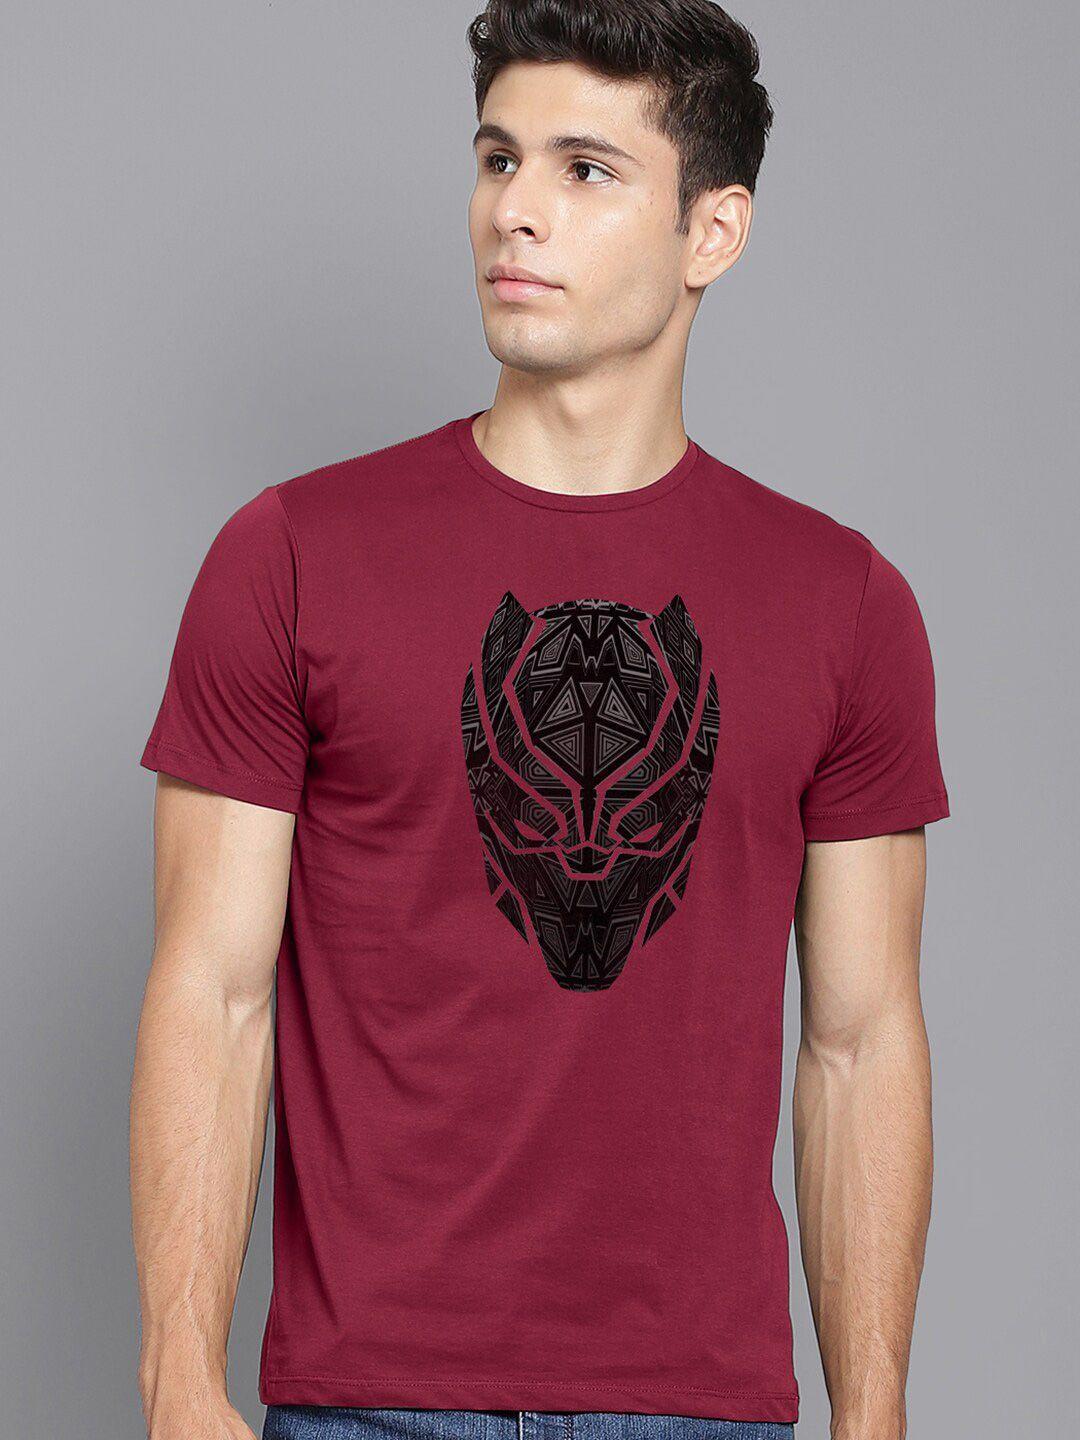 Free Authority Men Black Panther Printed Pure Cotton T-shirt